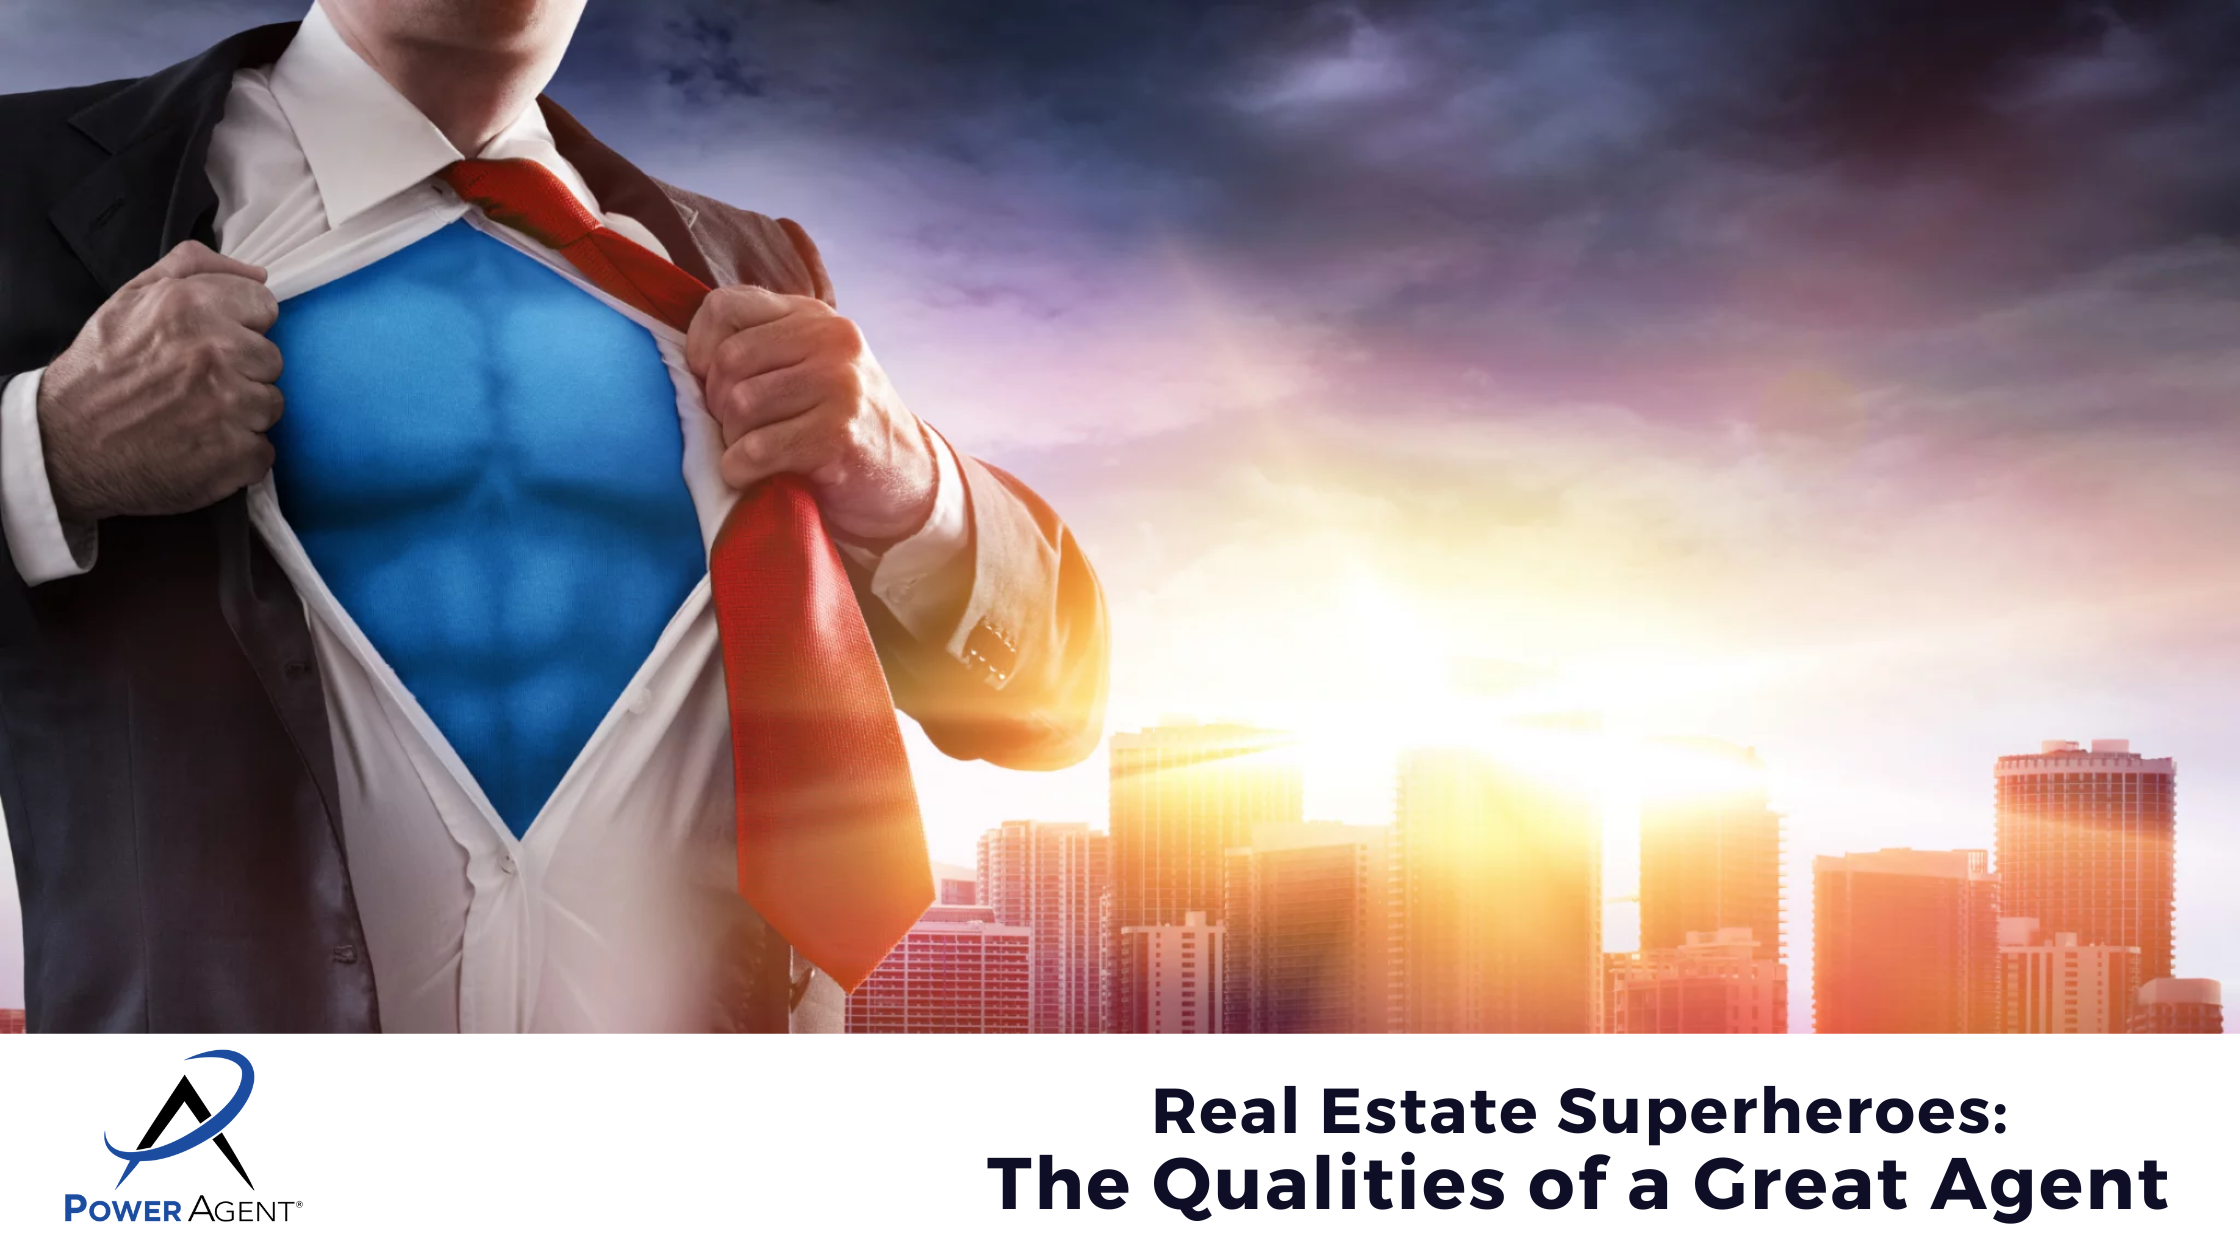 Real Estate Superheroes: The Qualities of a Great Agent